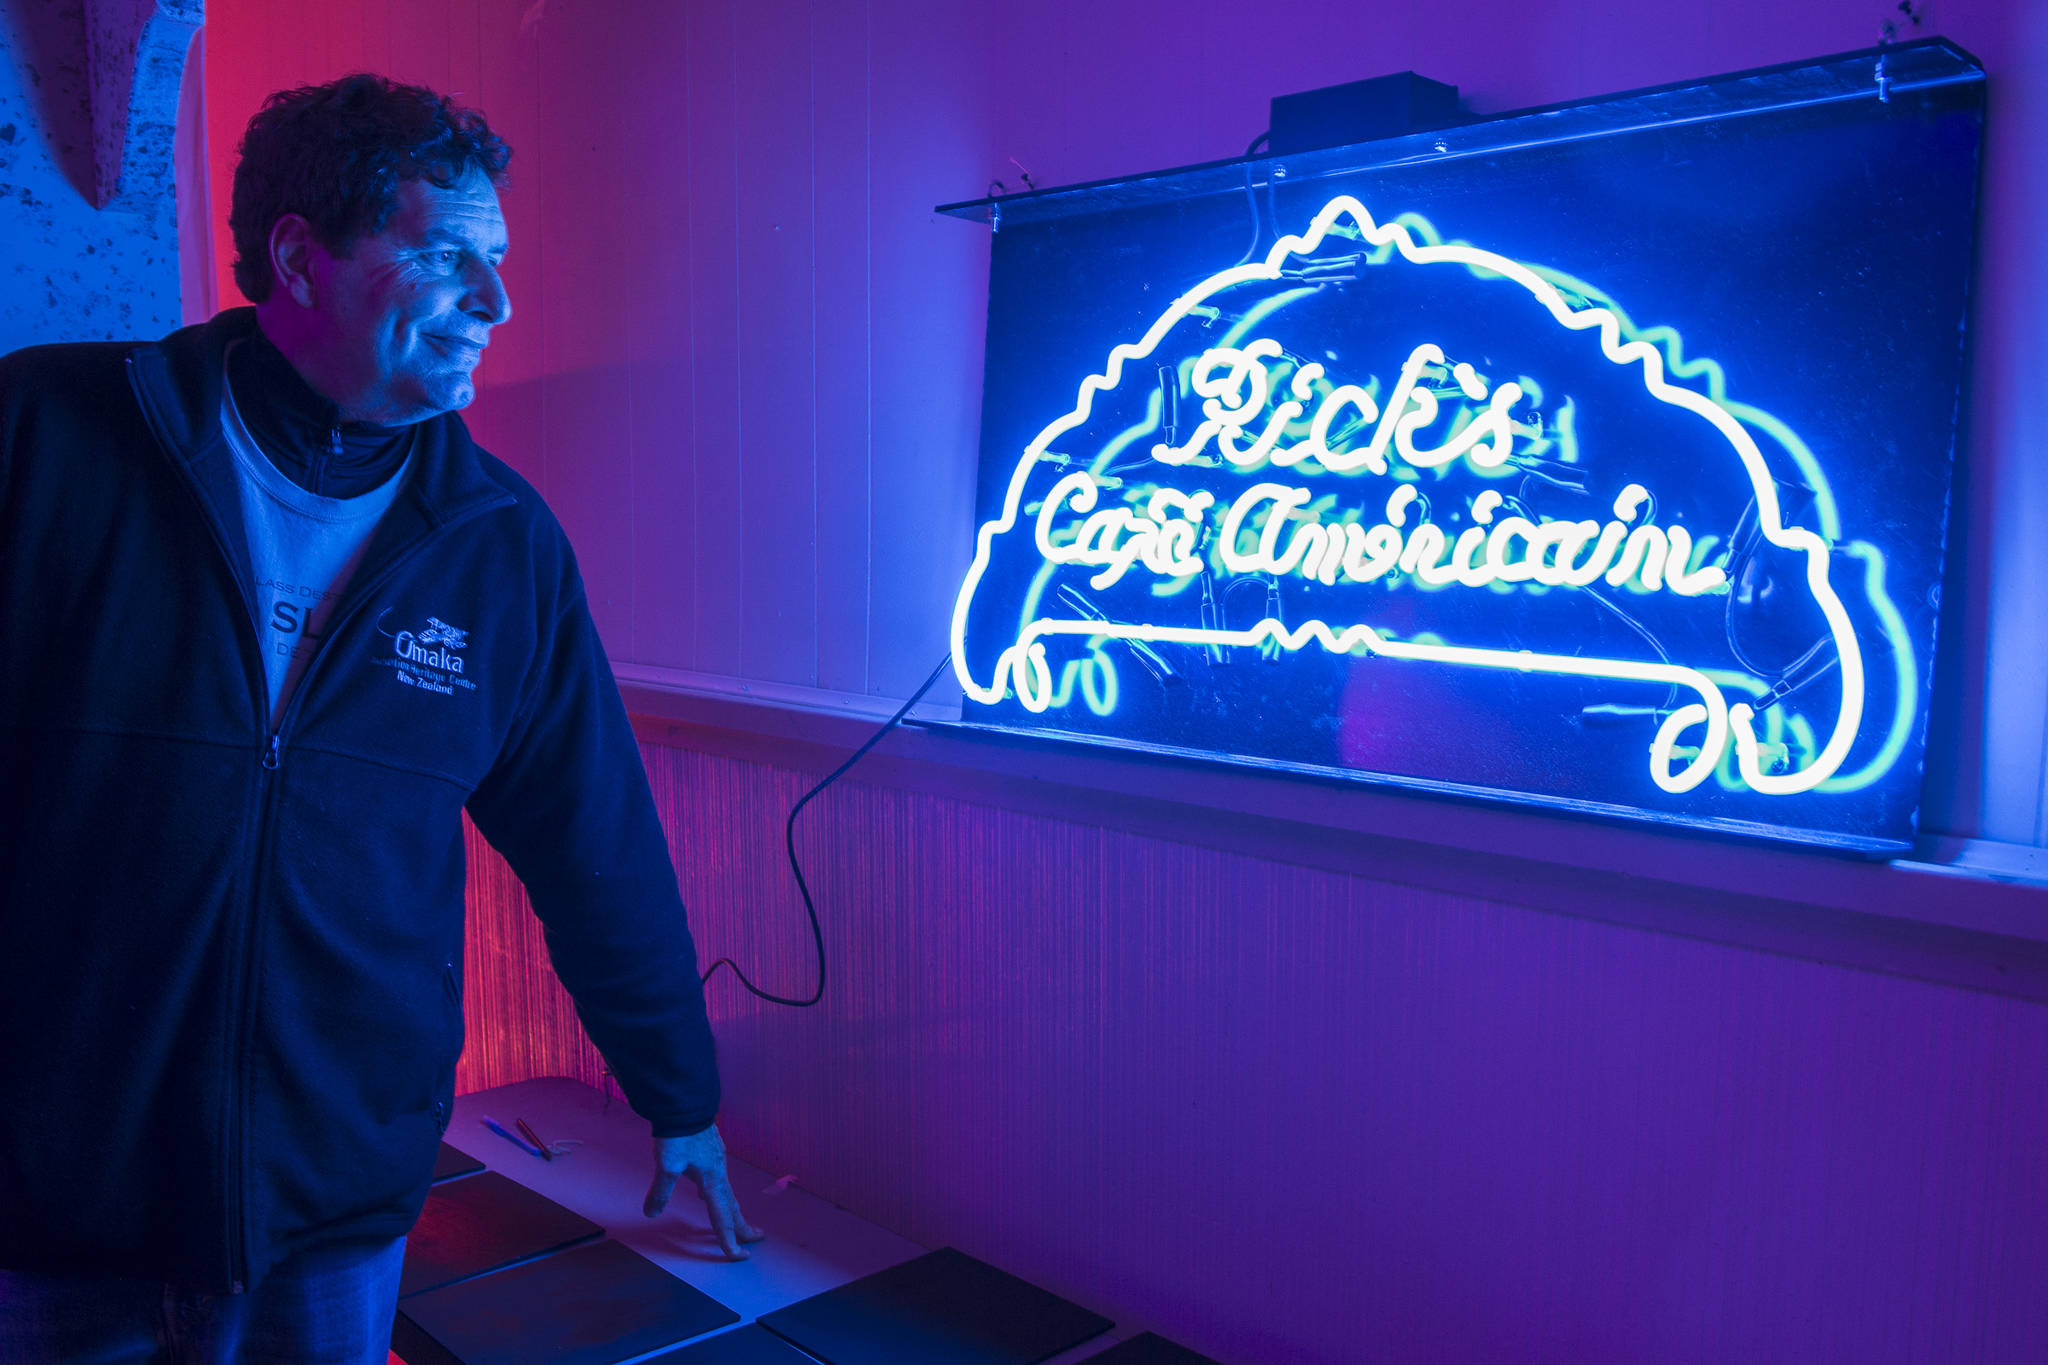 Juneau Lyric Opera boardmember John Clough admires their Rick’s Cafe Americain neon sign as they transform the Rockwell Ballroom to a 1941 Moroccian cafe for “Here’s Looking at You, Casablanca” on Monday, Nov. 5, 2018. The show is a presentation by the Juneau Lyric Opera and Gold Town Nickelodeon. (Michael Penn | Juneau Empire)